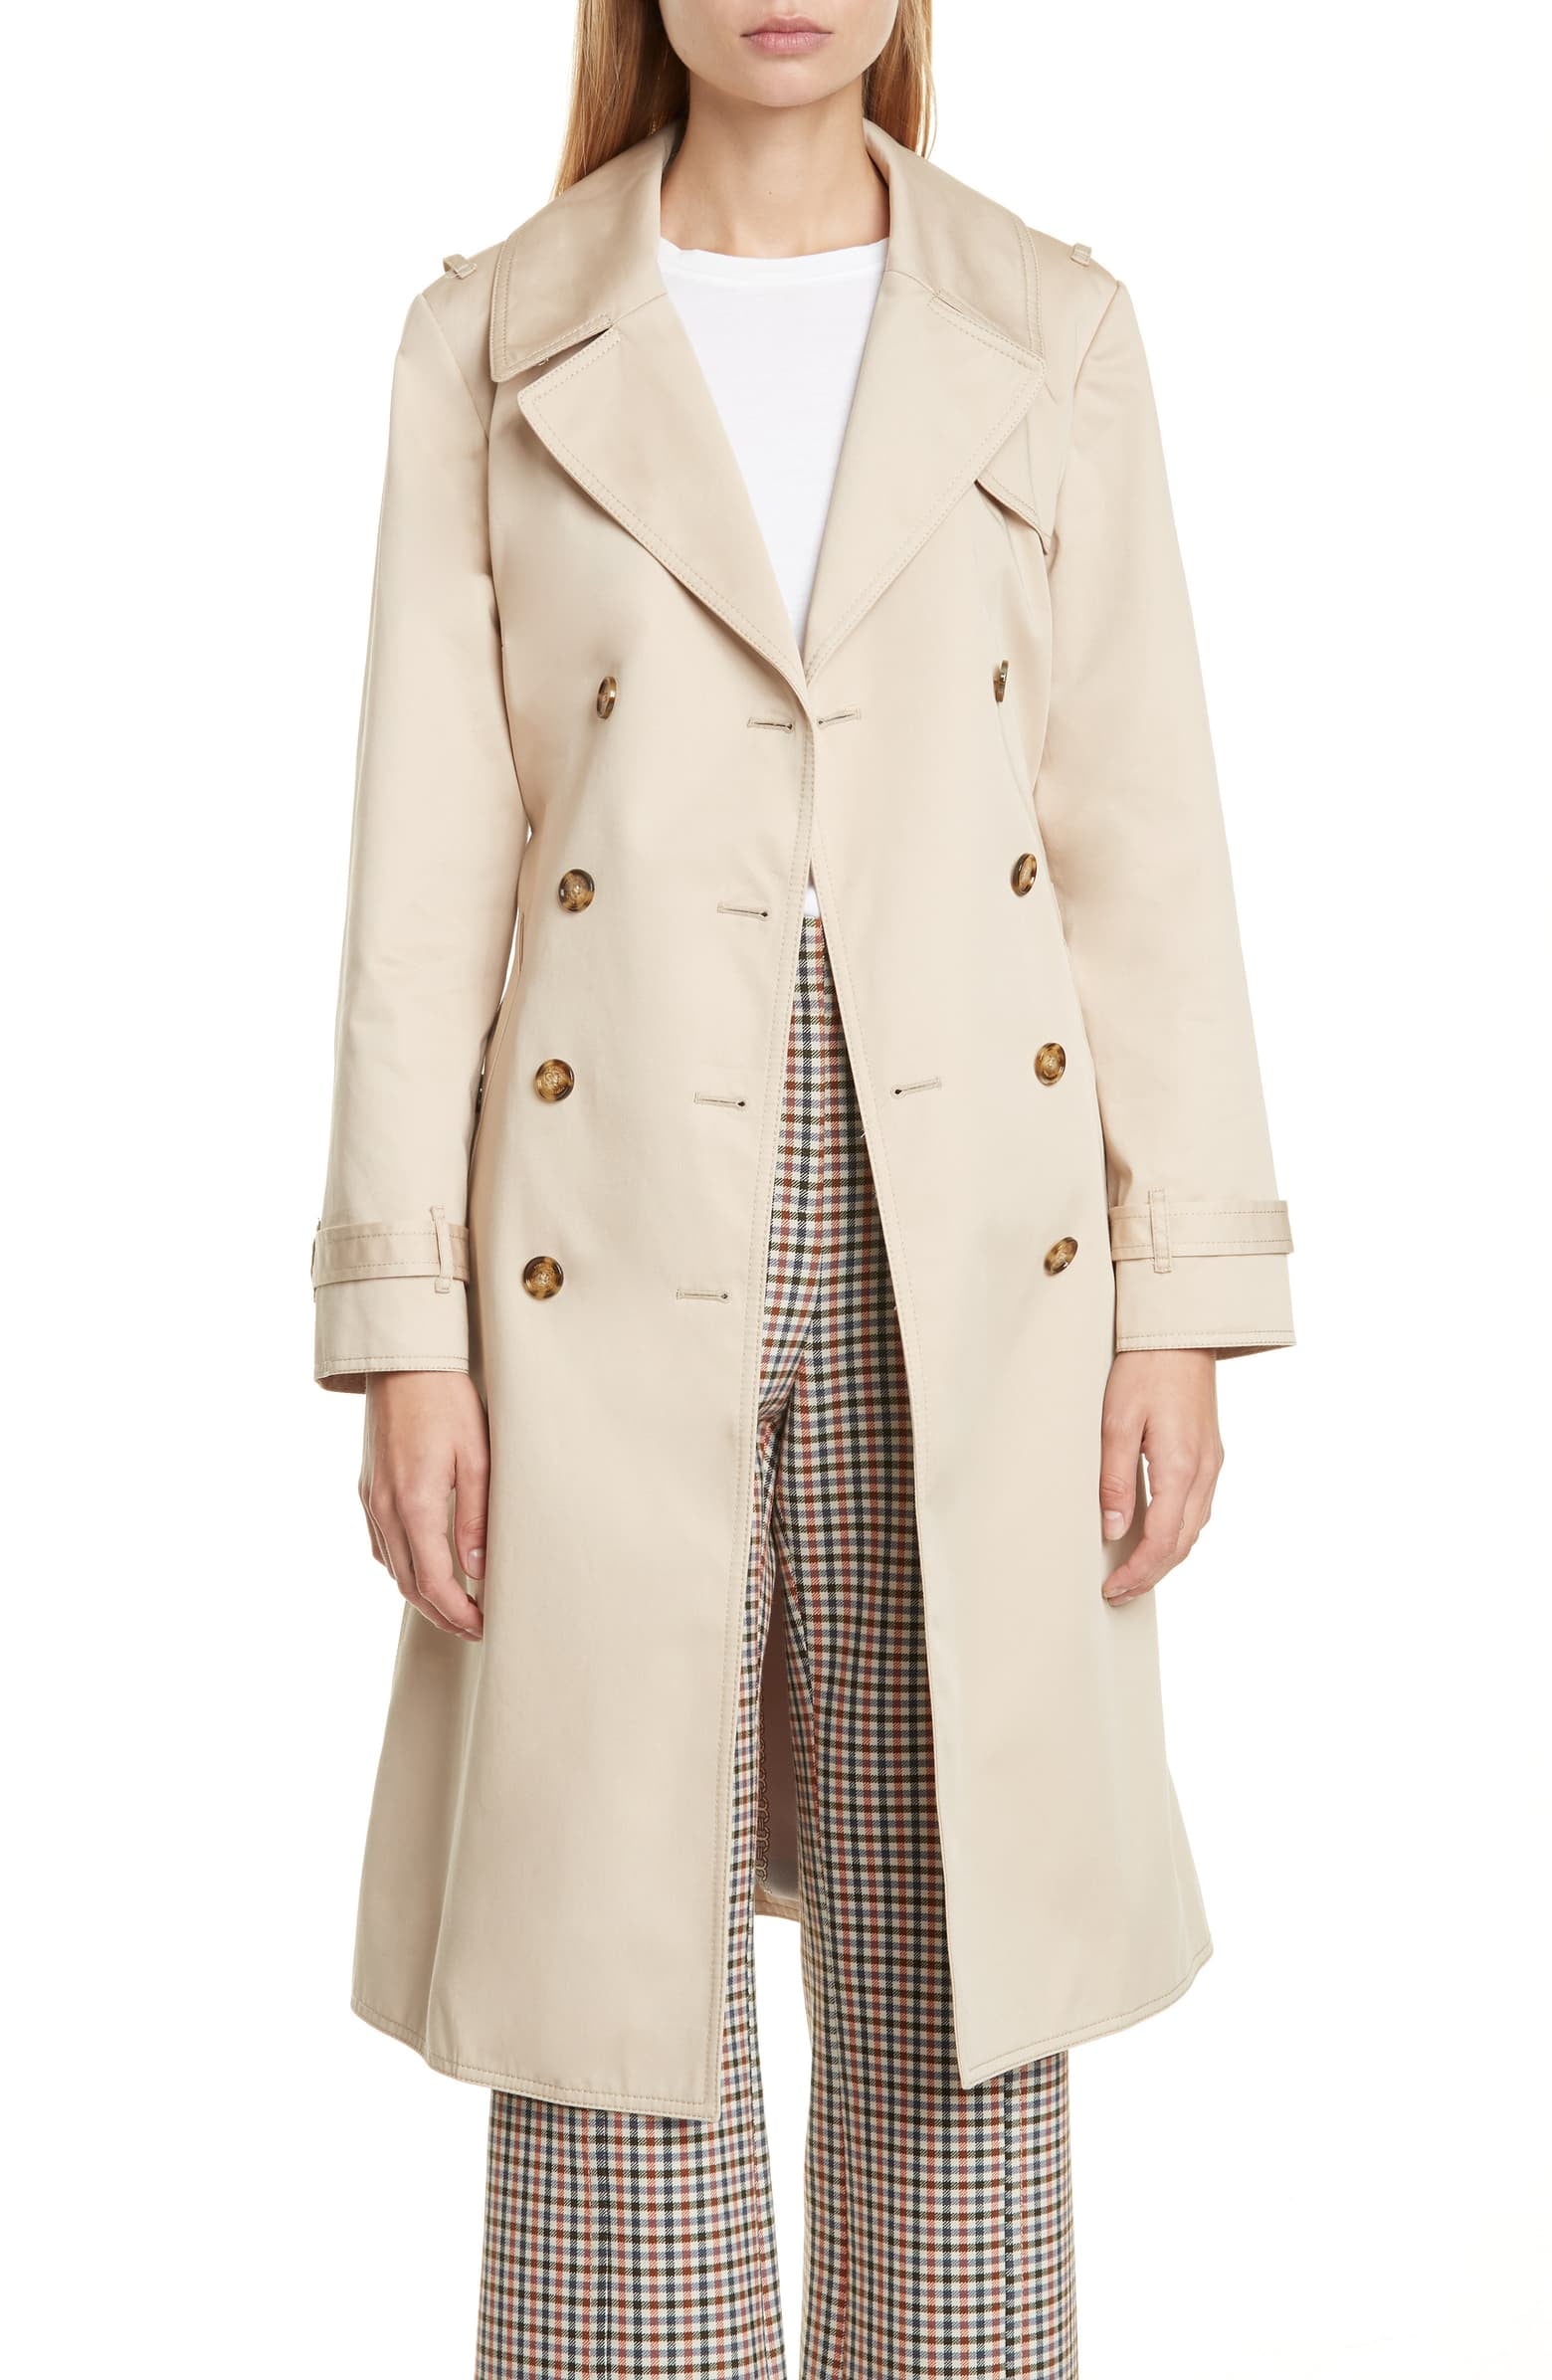 Tory Burch Gemini Trench Coat | This Is the Coat You're Going to Live In  All Season Long | POPSUGAR Fashion Photo 9